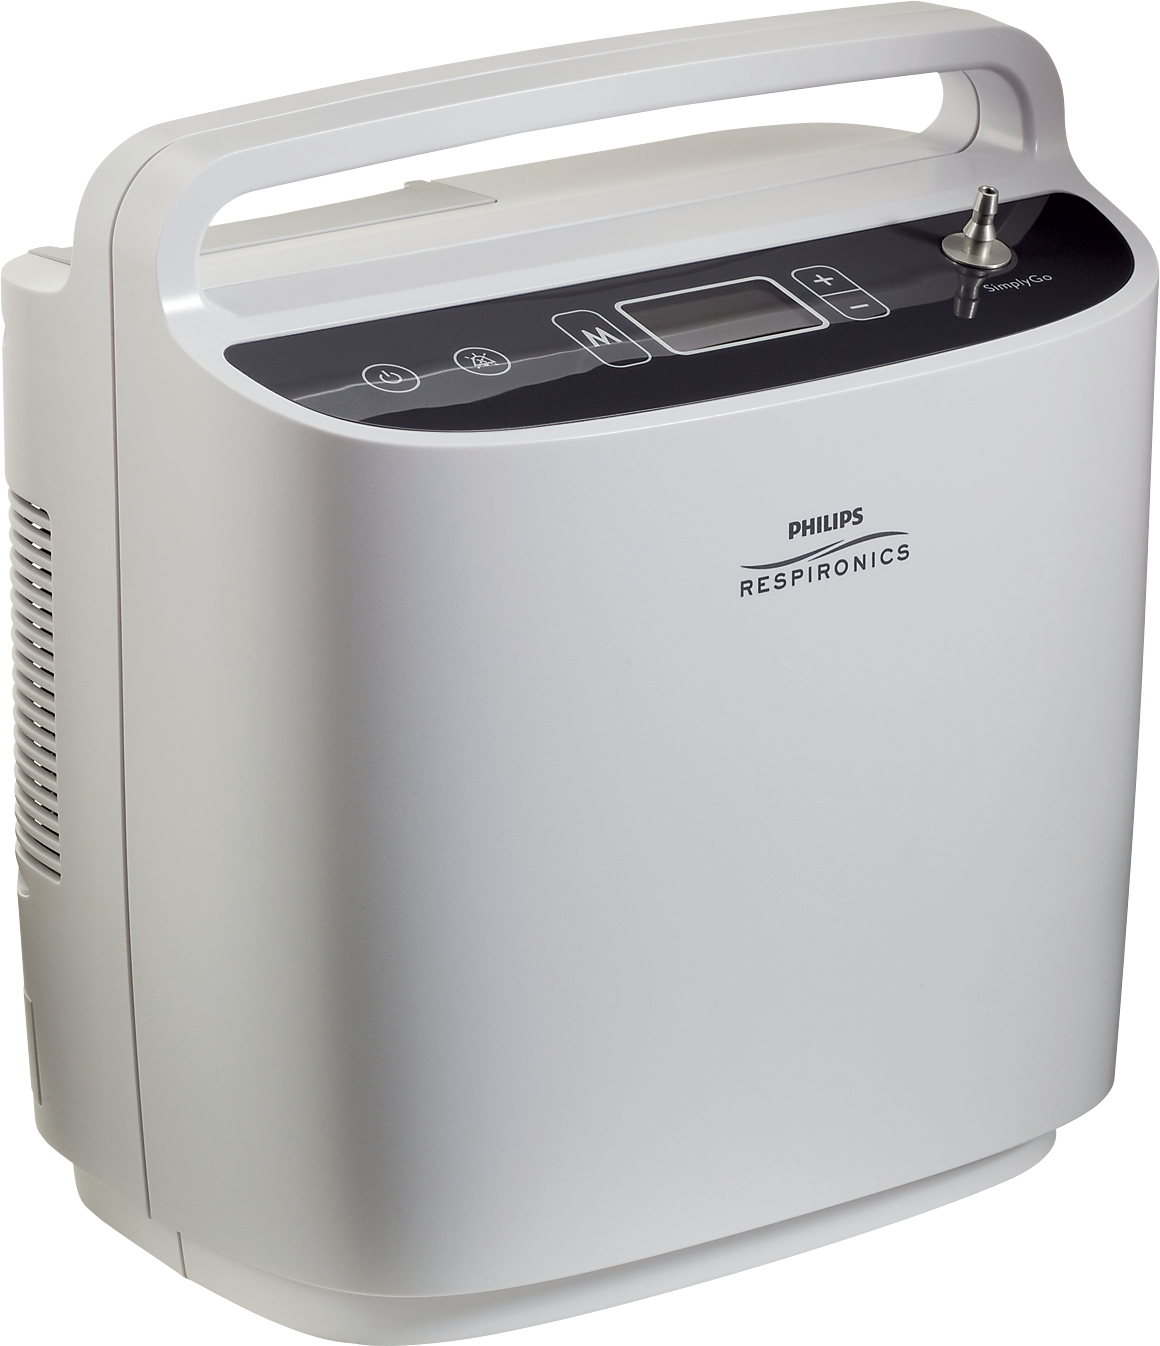 Photo of the SimplyGo Portable Oxygen Concentrator against a white background.